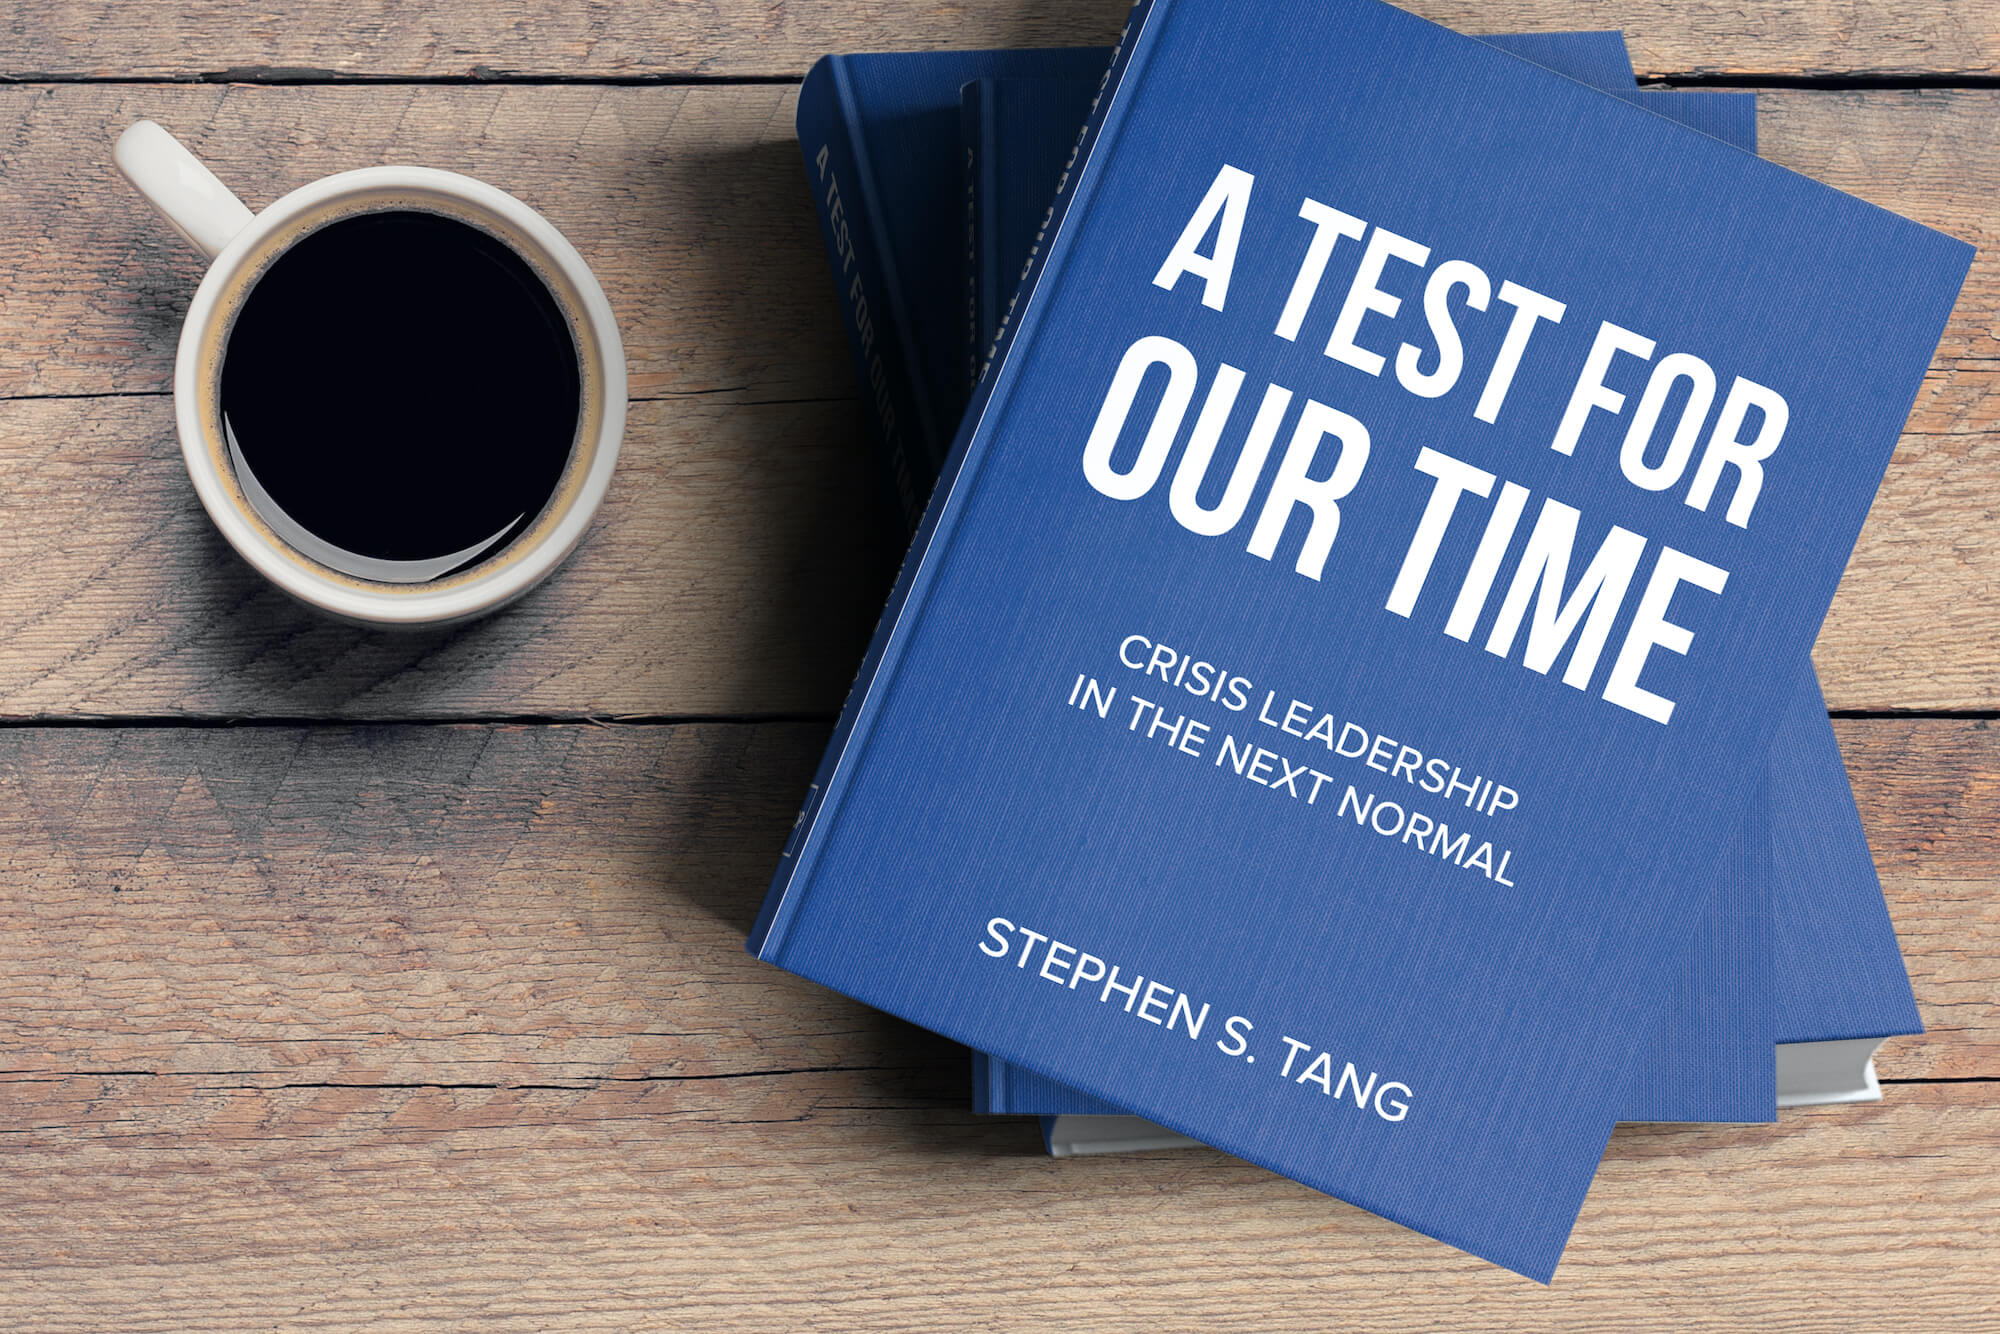 Stephen Tang Book Cover A Test for Our Time